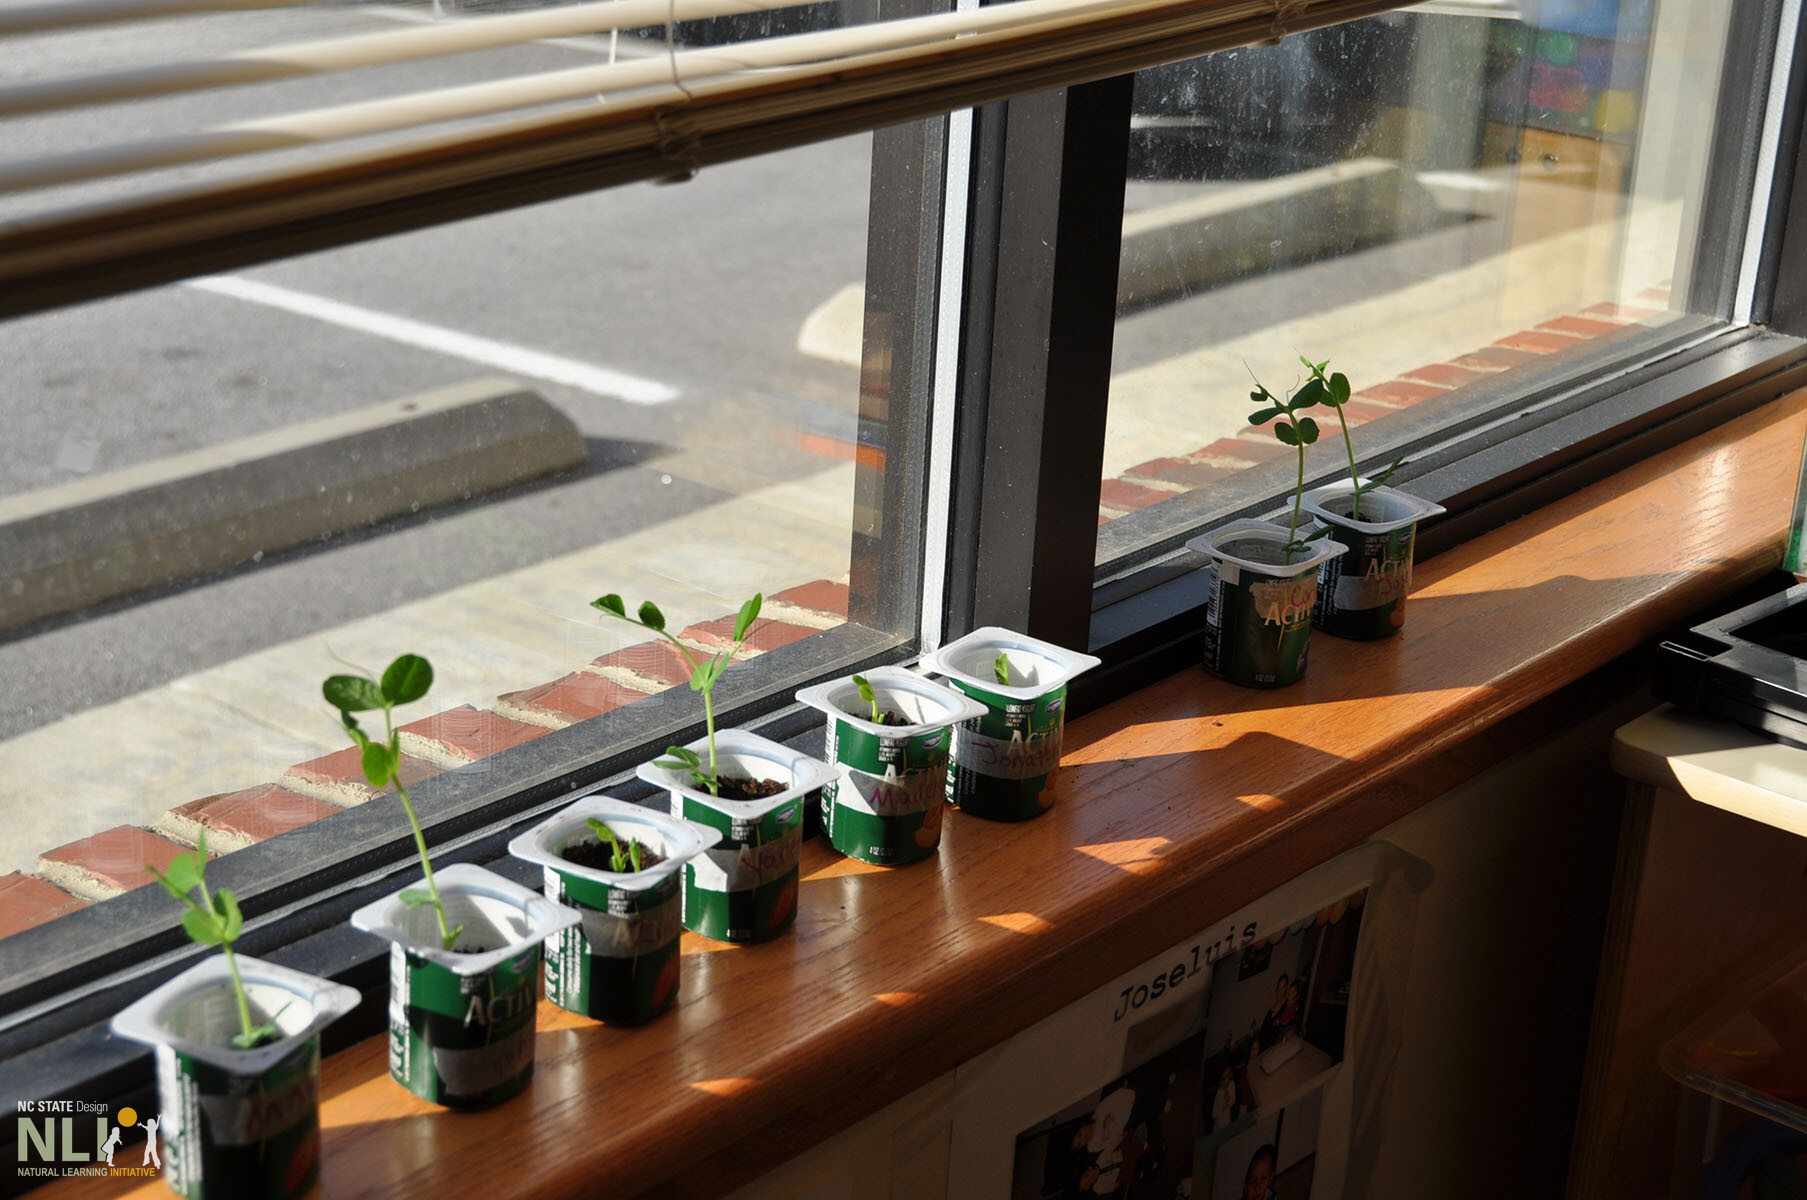 seedlings lined up by the window